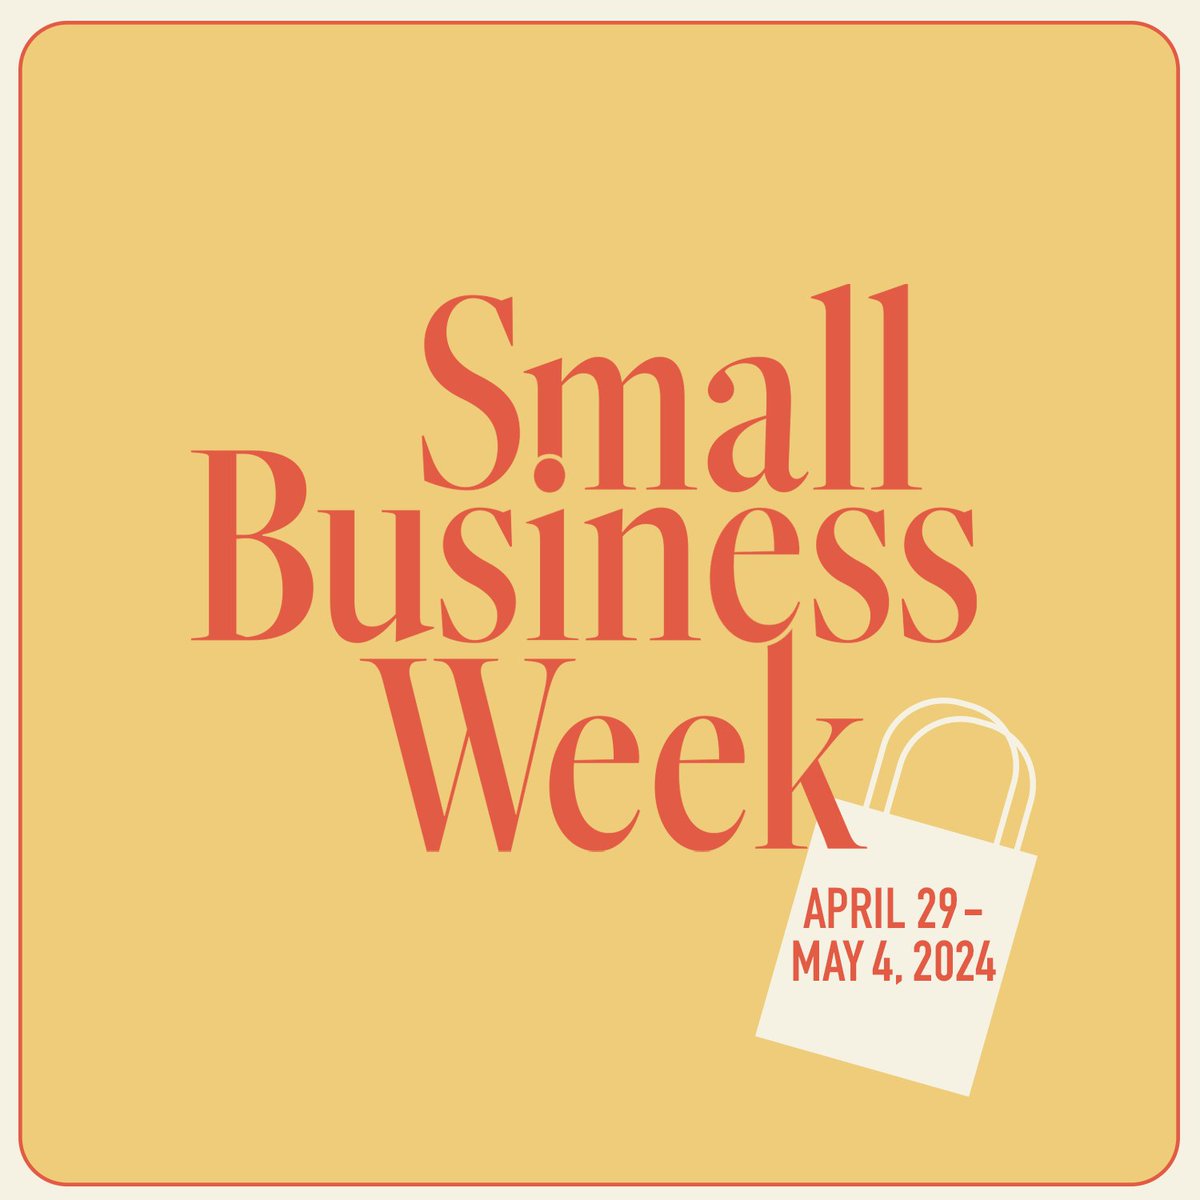 Happy Small Business Week! When America's small businesses are strong – America is strong. Let's continue to support the local shops that drive our economy and make up the fabric of our communities. #SmallBusinessWeek